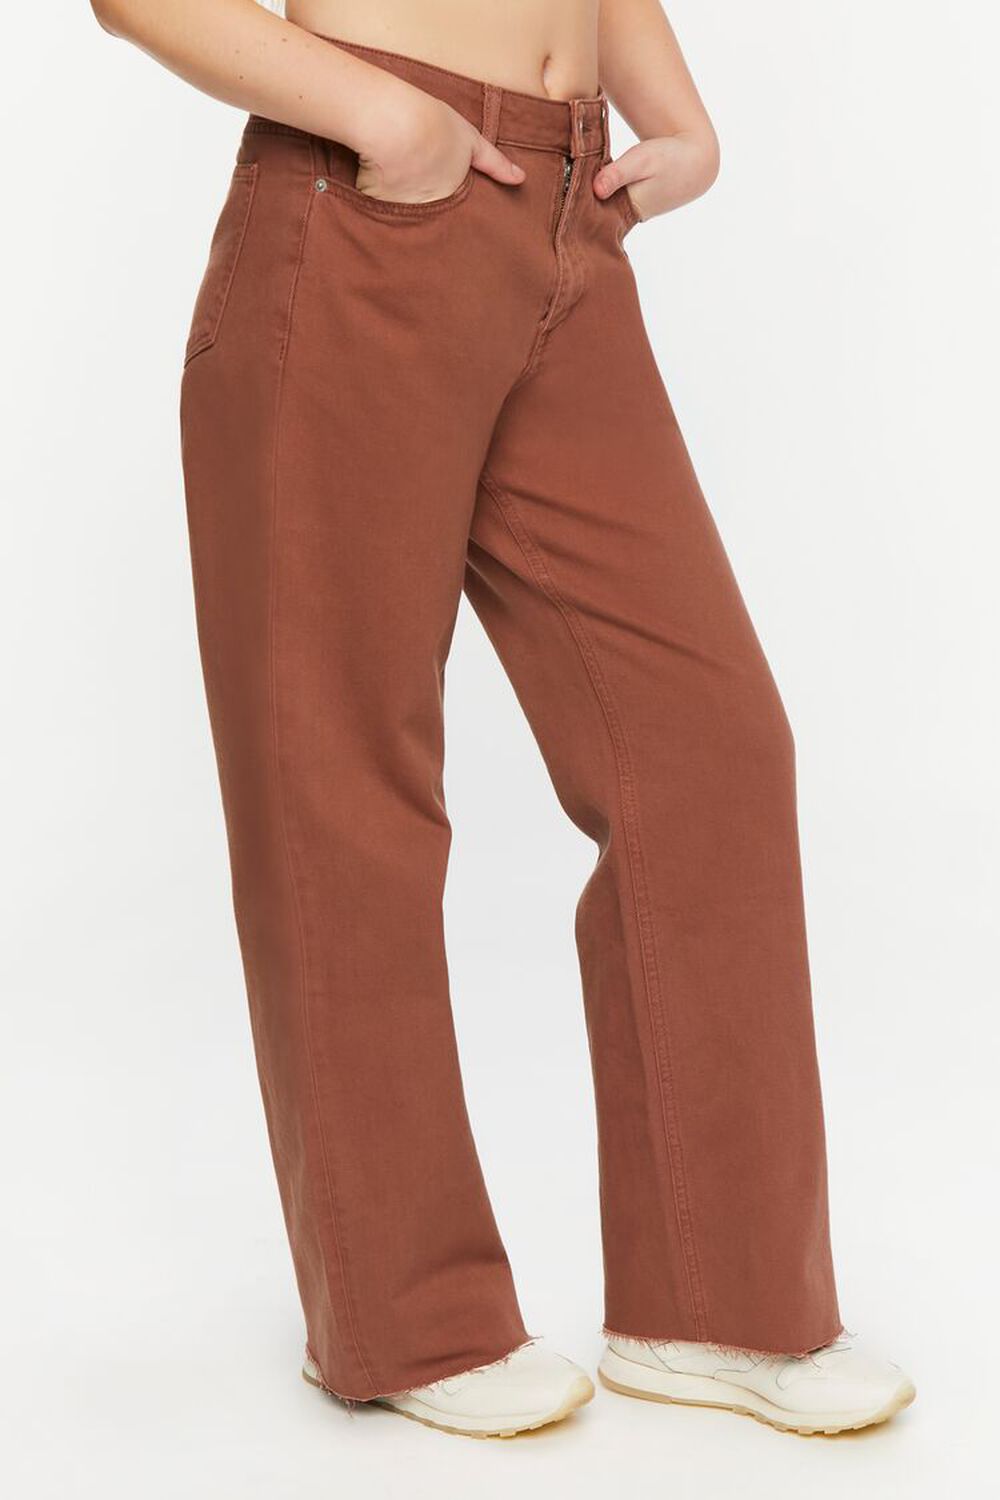 BROWN Recycled Cotton 90s-Fit High-Rise Jeans, image 3